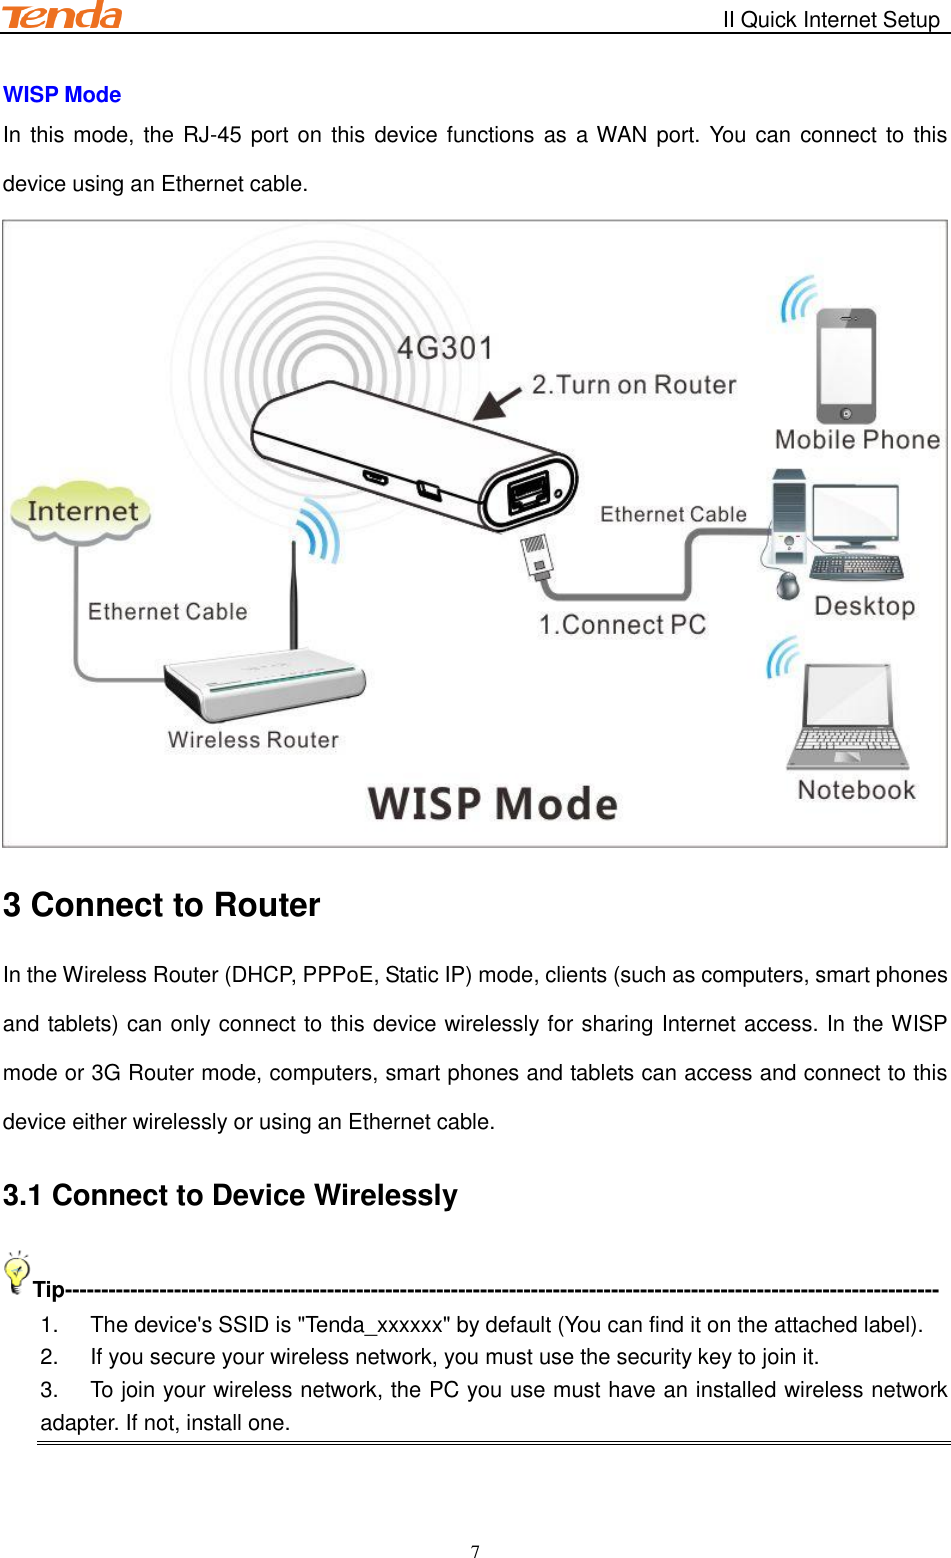                                                        II Quick Internet Setup         7 WISP Mode In this mode, the RJ-45 port  on  this device functions as a WAN port. You can connect to this device using an Ethernet cable.  3 Connect to Router In the Wireless Router (DHCP, PPPoE, Static IP) mode, clients (such as computers, smart phones and tablets) can only connect to this device wirelessly for sharing Internet access. In the WISP mode or 3G Router mode, computers, smart phones and tablets can access and connect to this device either wirelessly or using an Ethernet cable. 3.1 Connect to Device Wirelessly Tip------------------------------------------------------------------------------------------------------------------------ 1.  The device&apos;s SSID is &quot;Tenda_xxxxxx&quot; by default (You can find it on the attached label). 2.  If you secure your wireless network, you must use the security key to join it. 3.  To join your wireless network, the PC you use must have an installed wireless network adapter. If not, install one.  